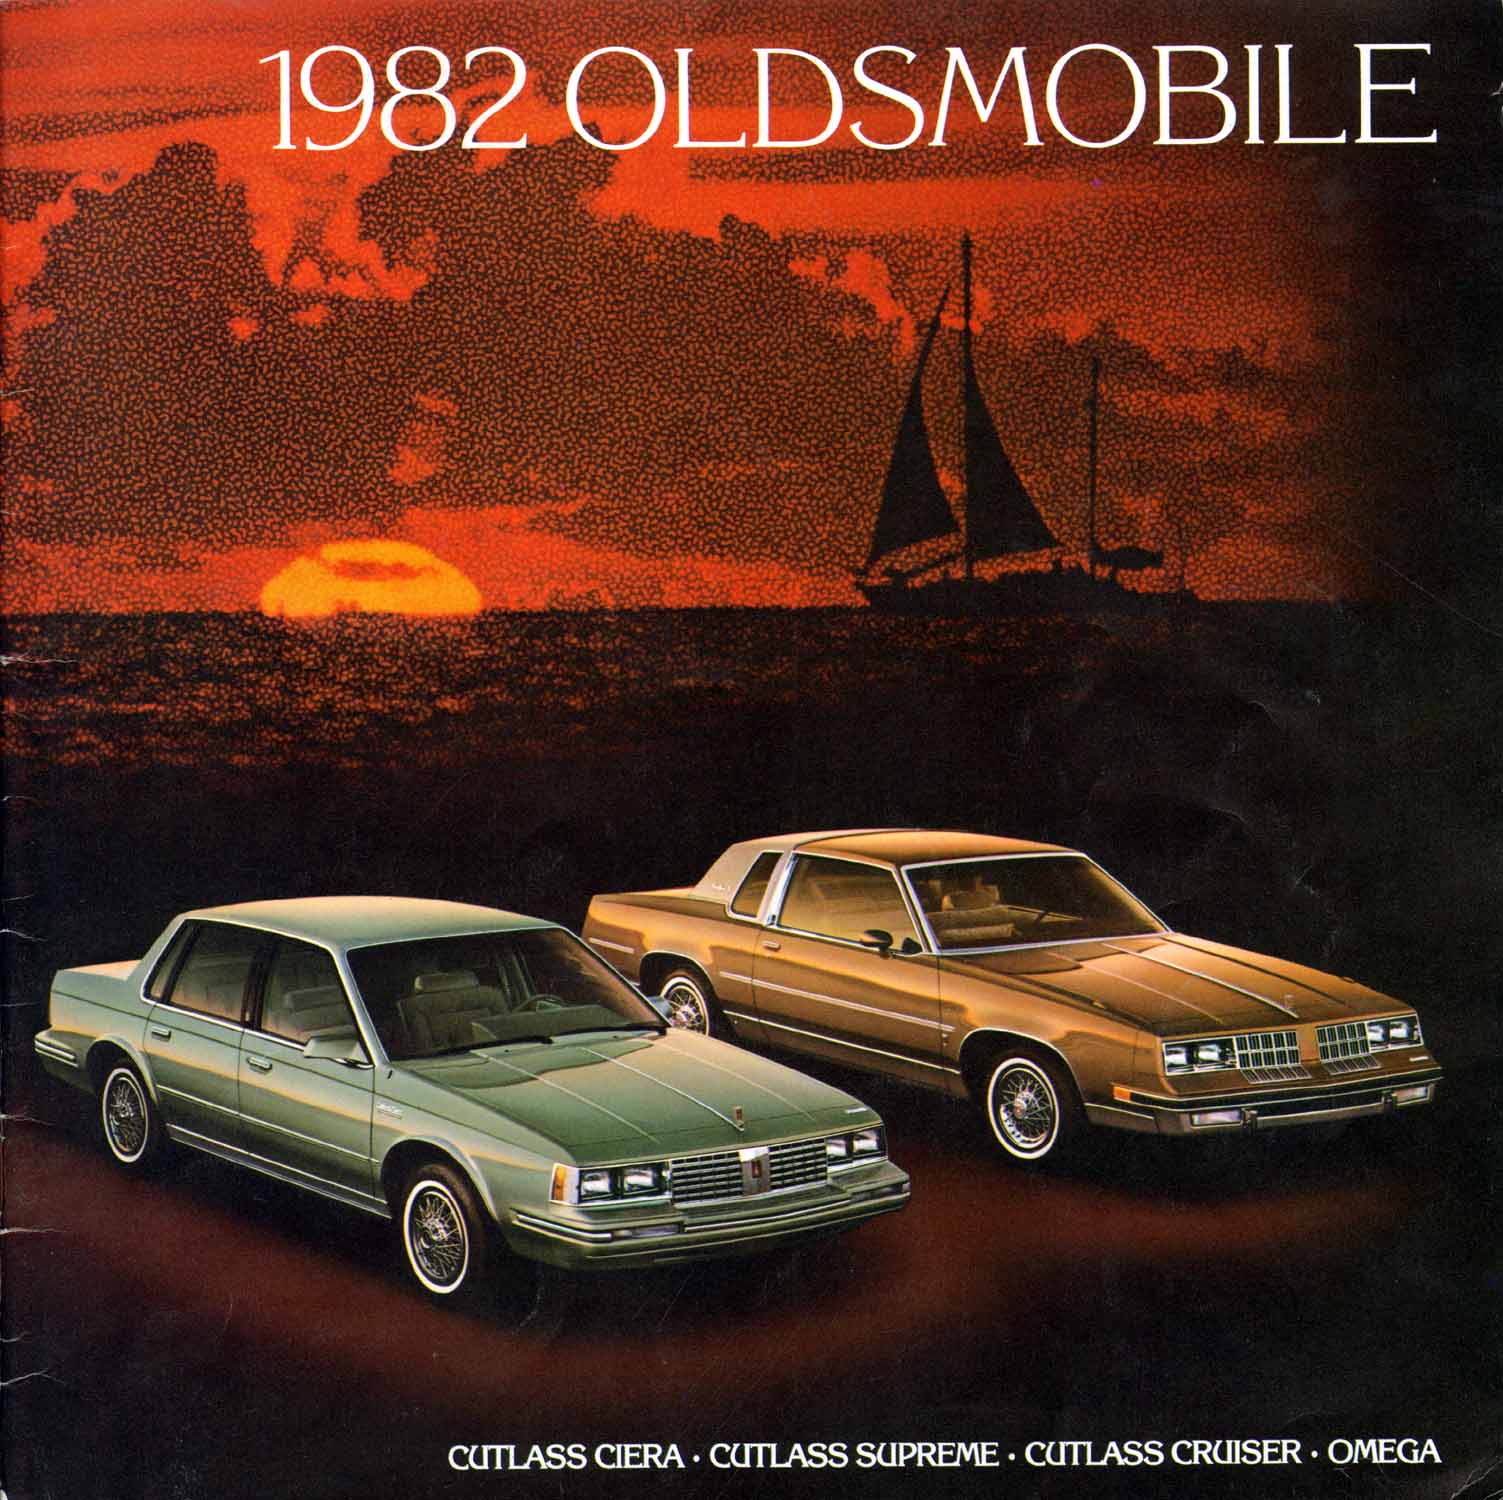 1982_Oldsmobile_Small_Size-01